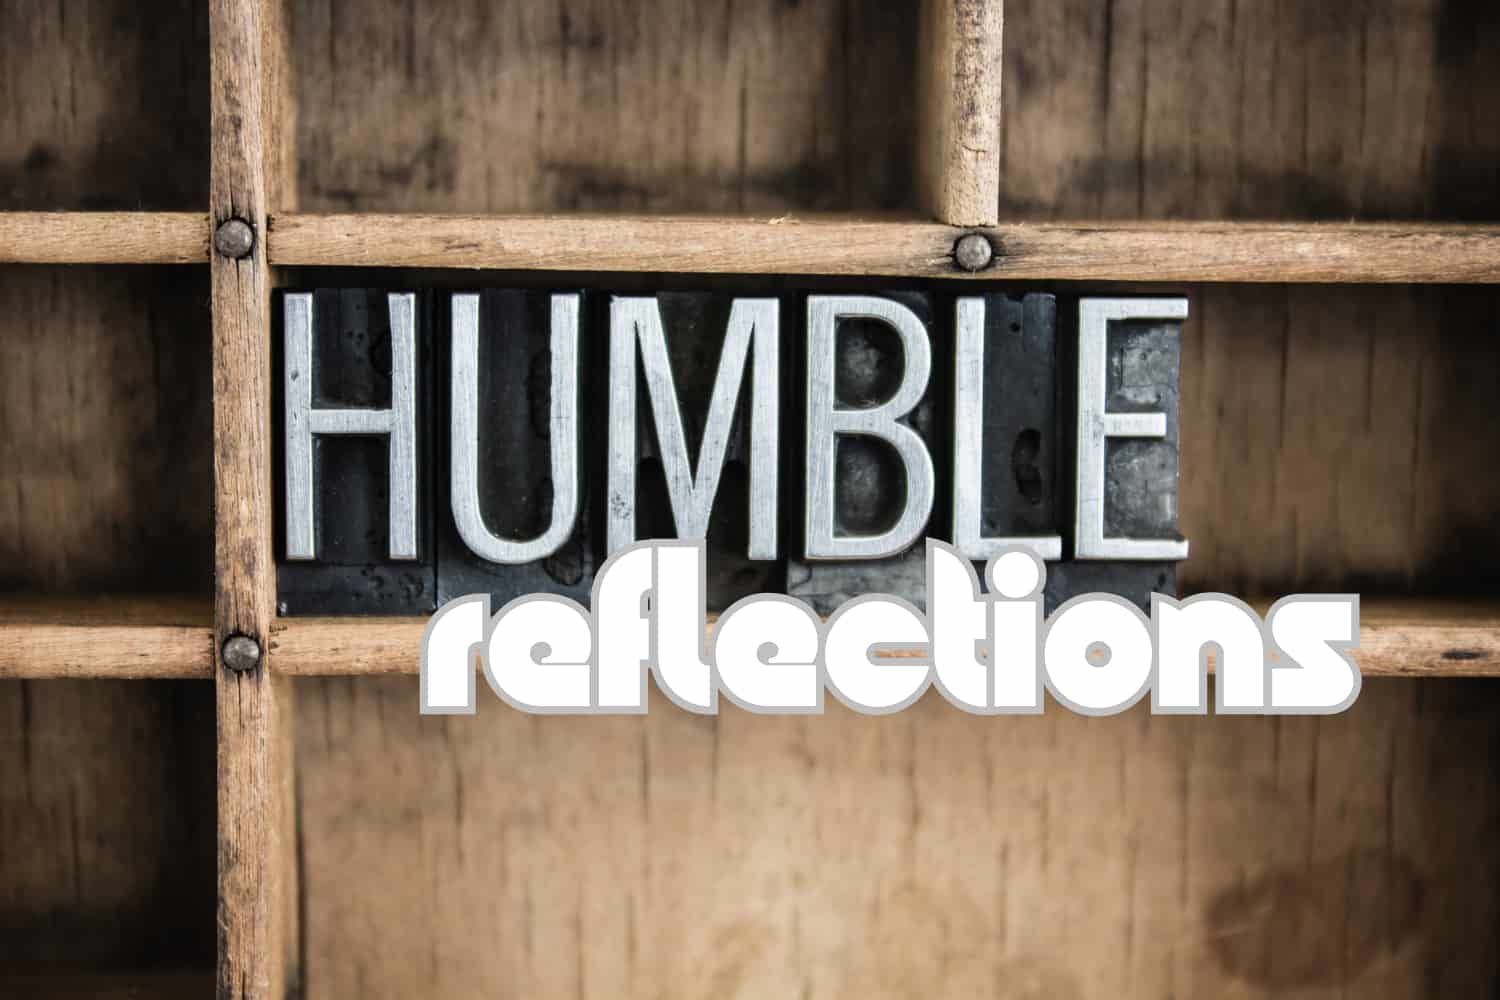 Object%20lesson%20-%20NT%20The%20pharisee%20and%20the%20tax%20collector%20-%20Humble%20reflections-5792de36 Object lessons